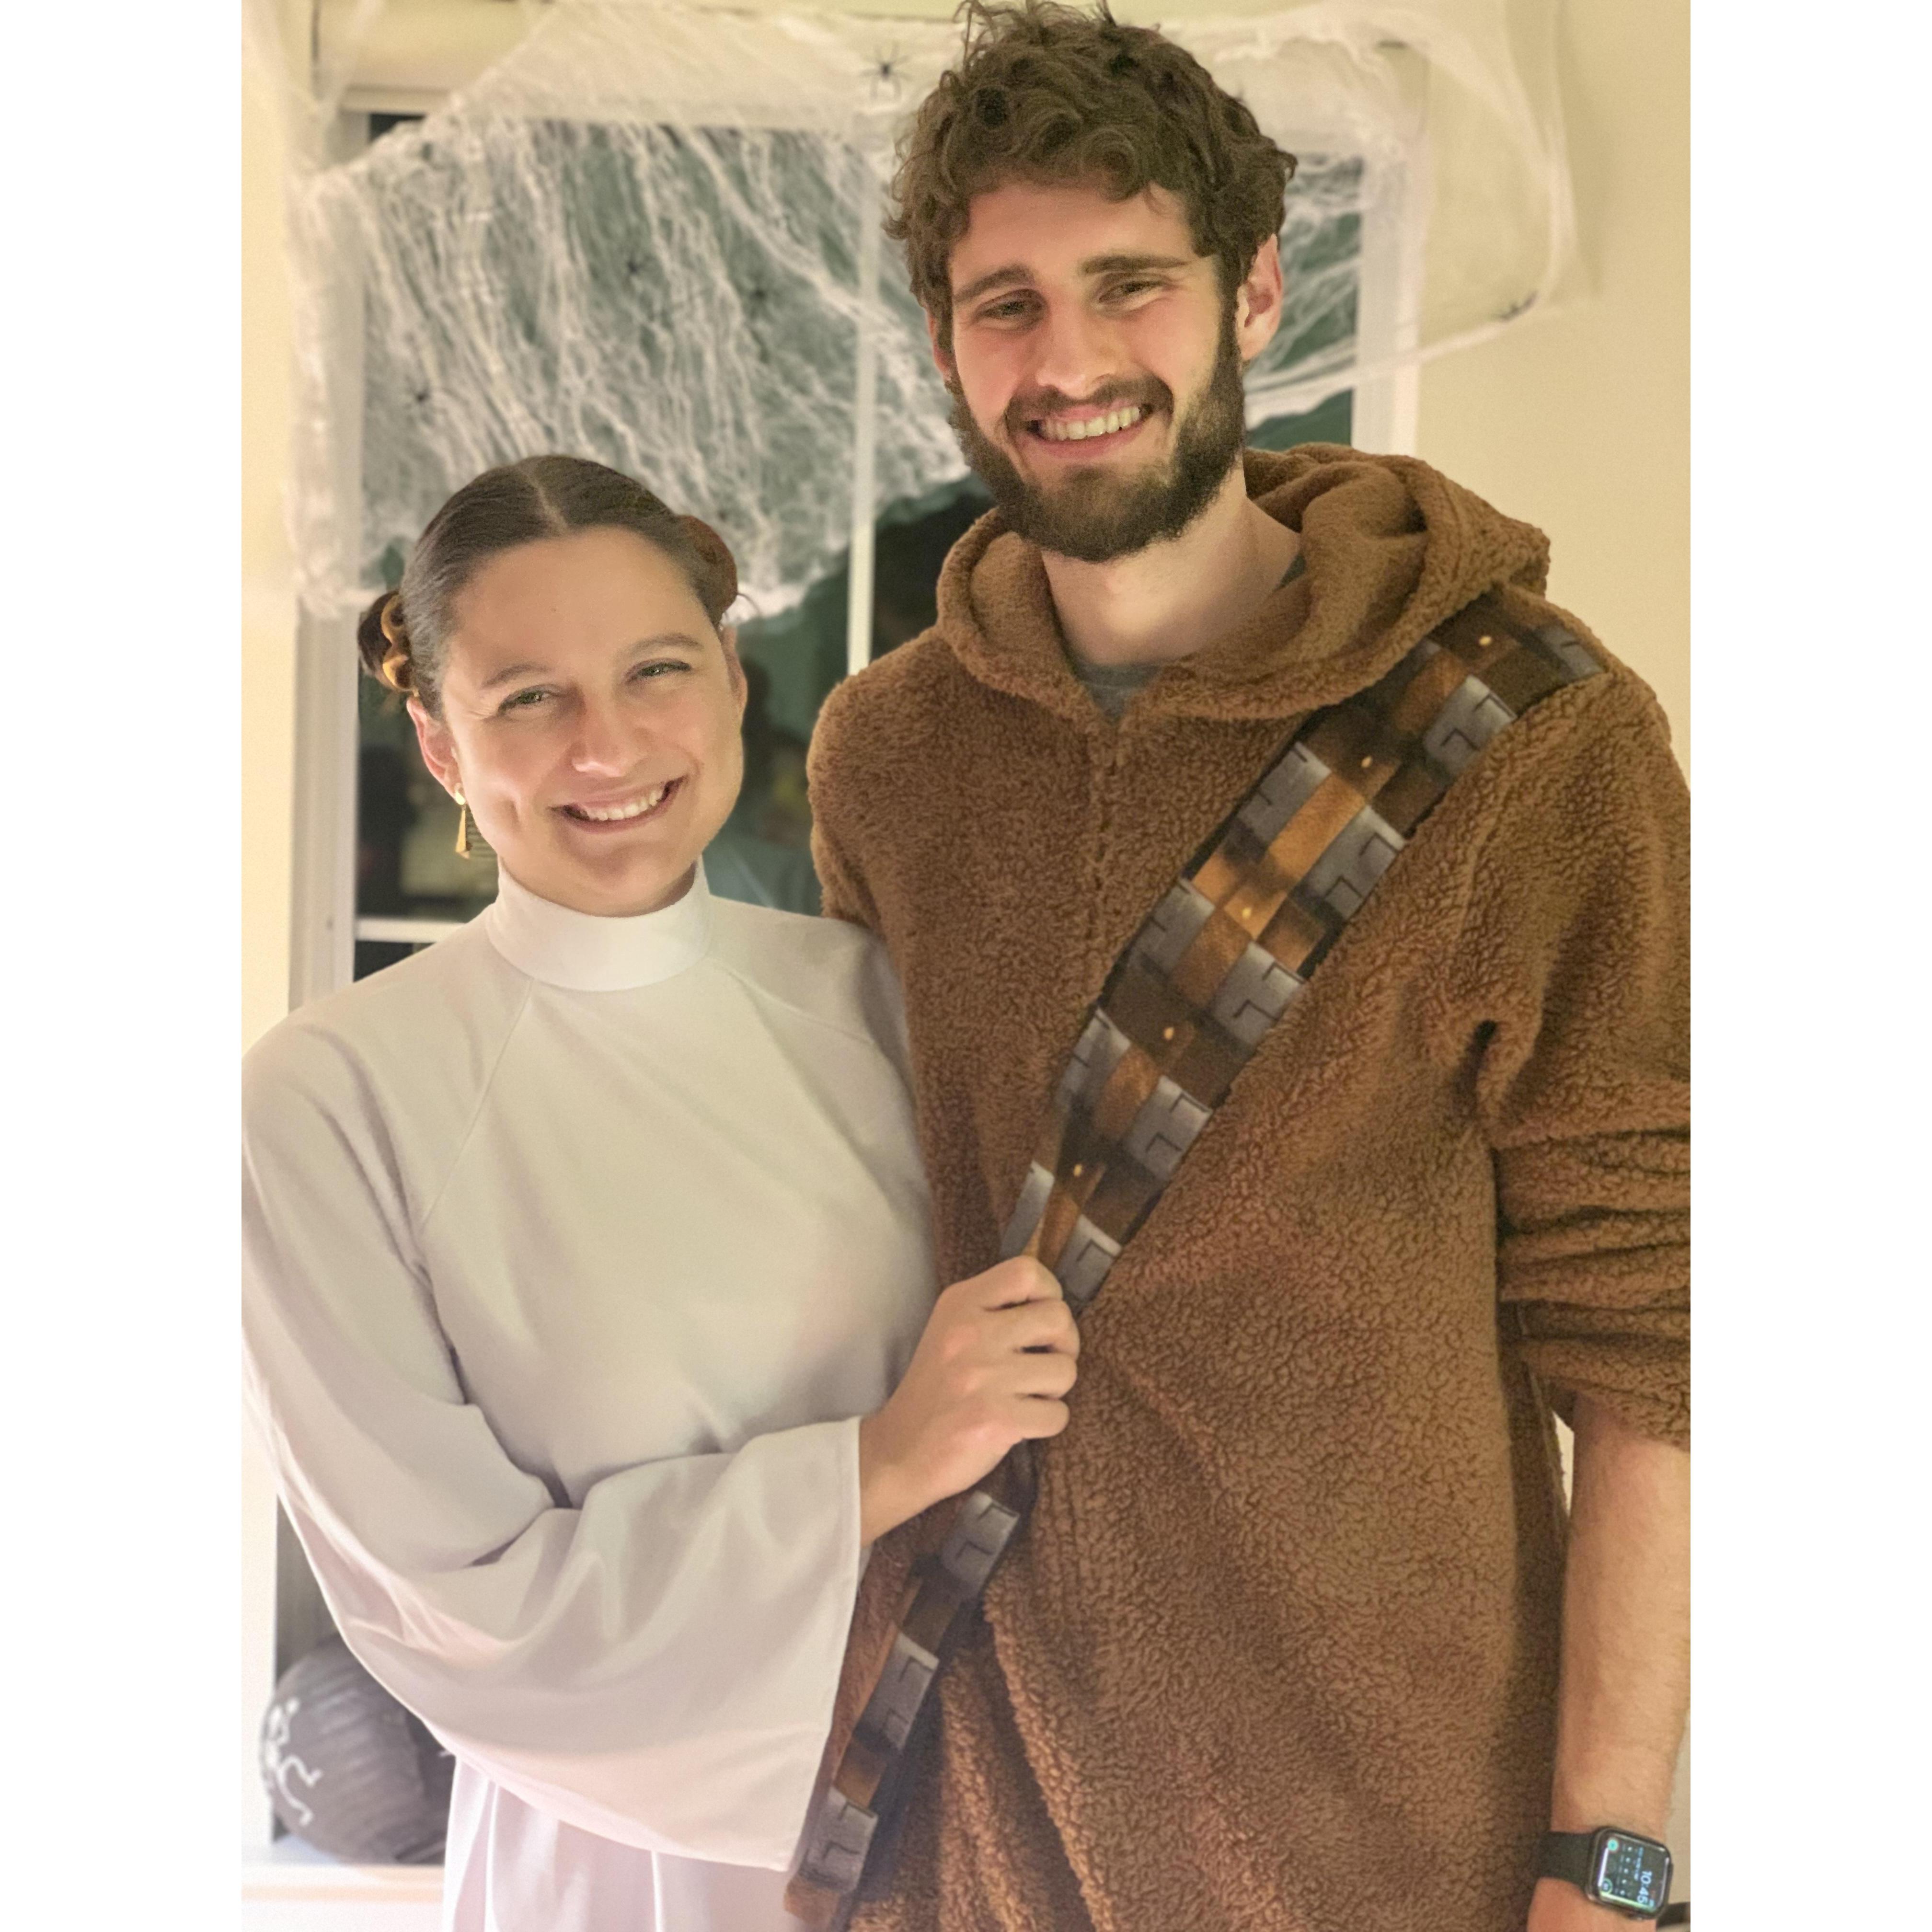 Halloween 2021
Our fourth year dressing up as Leia and Chewy, we just look so good this way we haven't come up with a new couples costume yet!